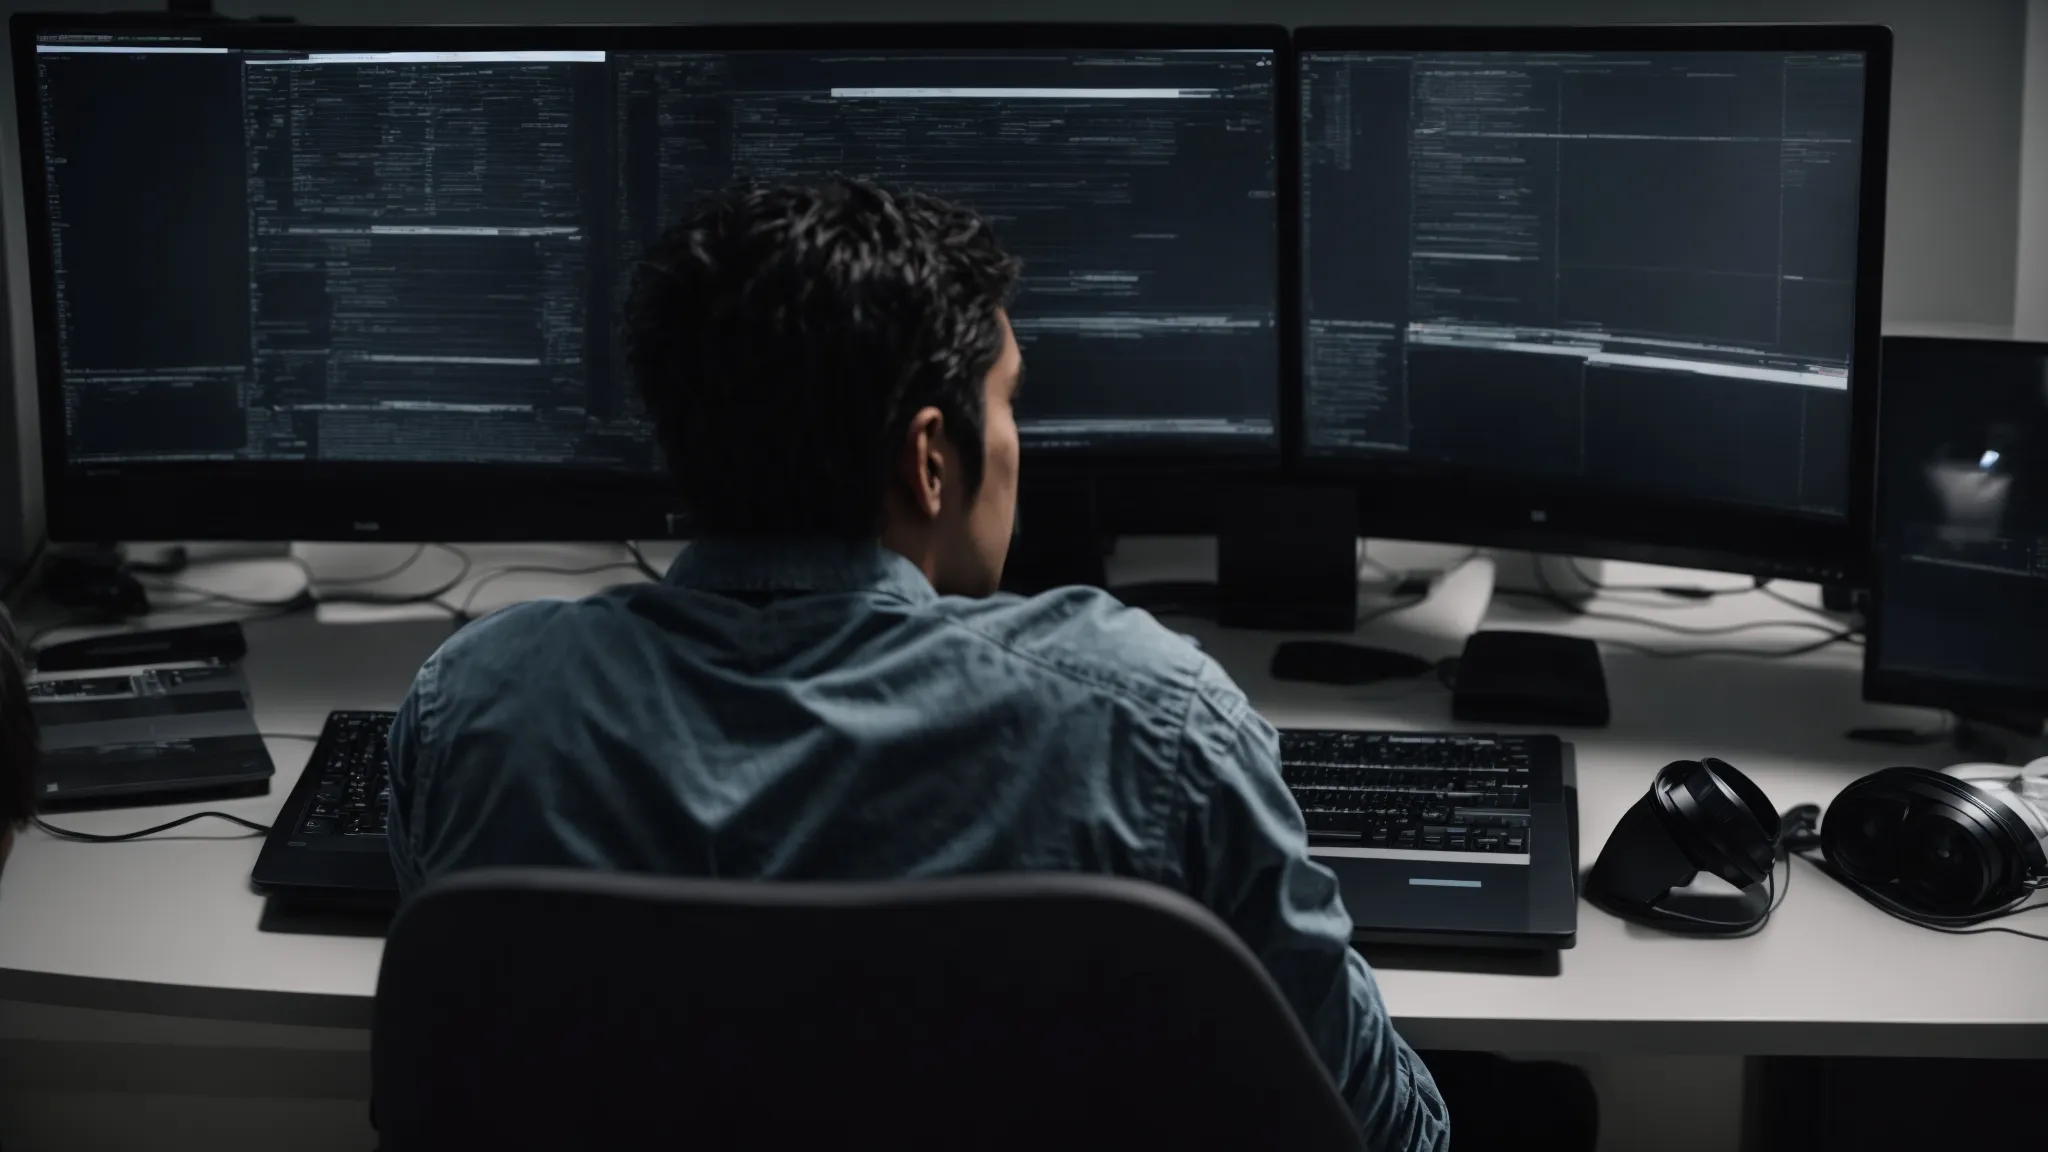 a person sits before a dual-monitor computer setup, deep in concentration as they navigate an advanced seo software platform.